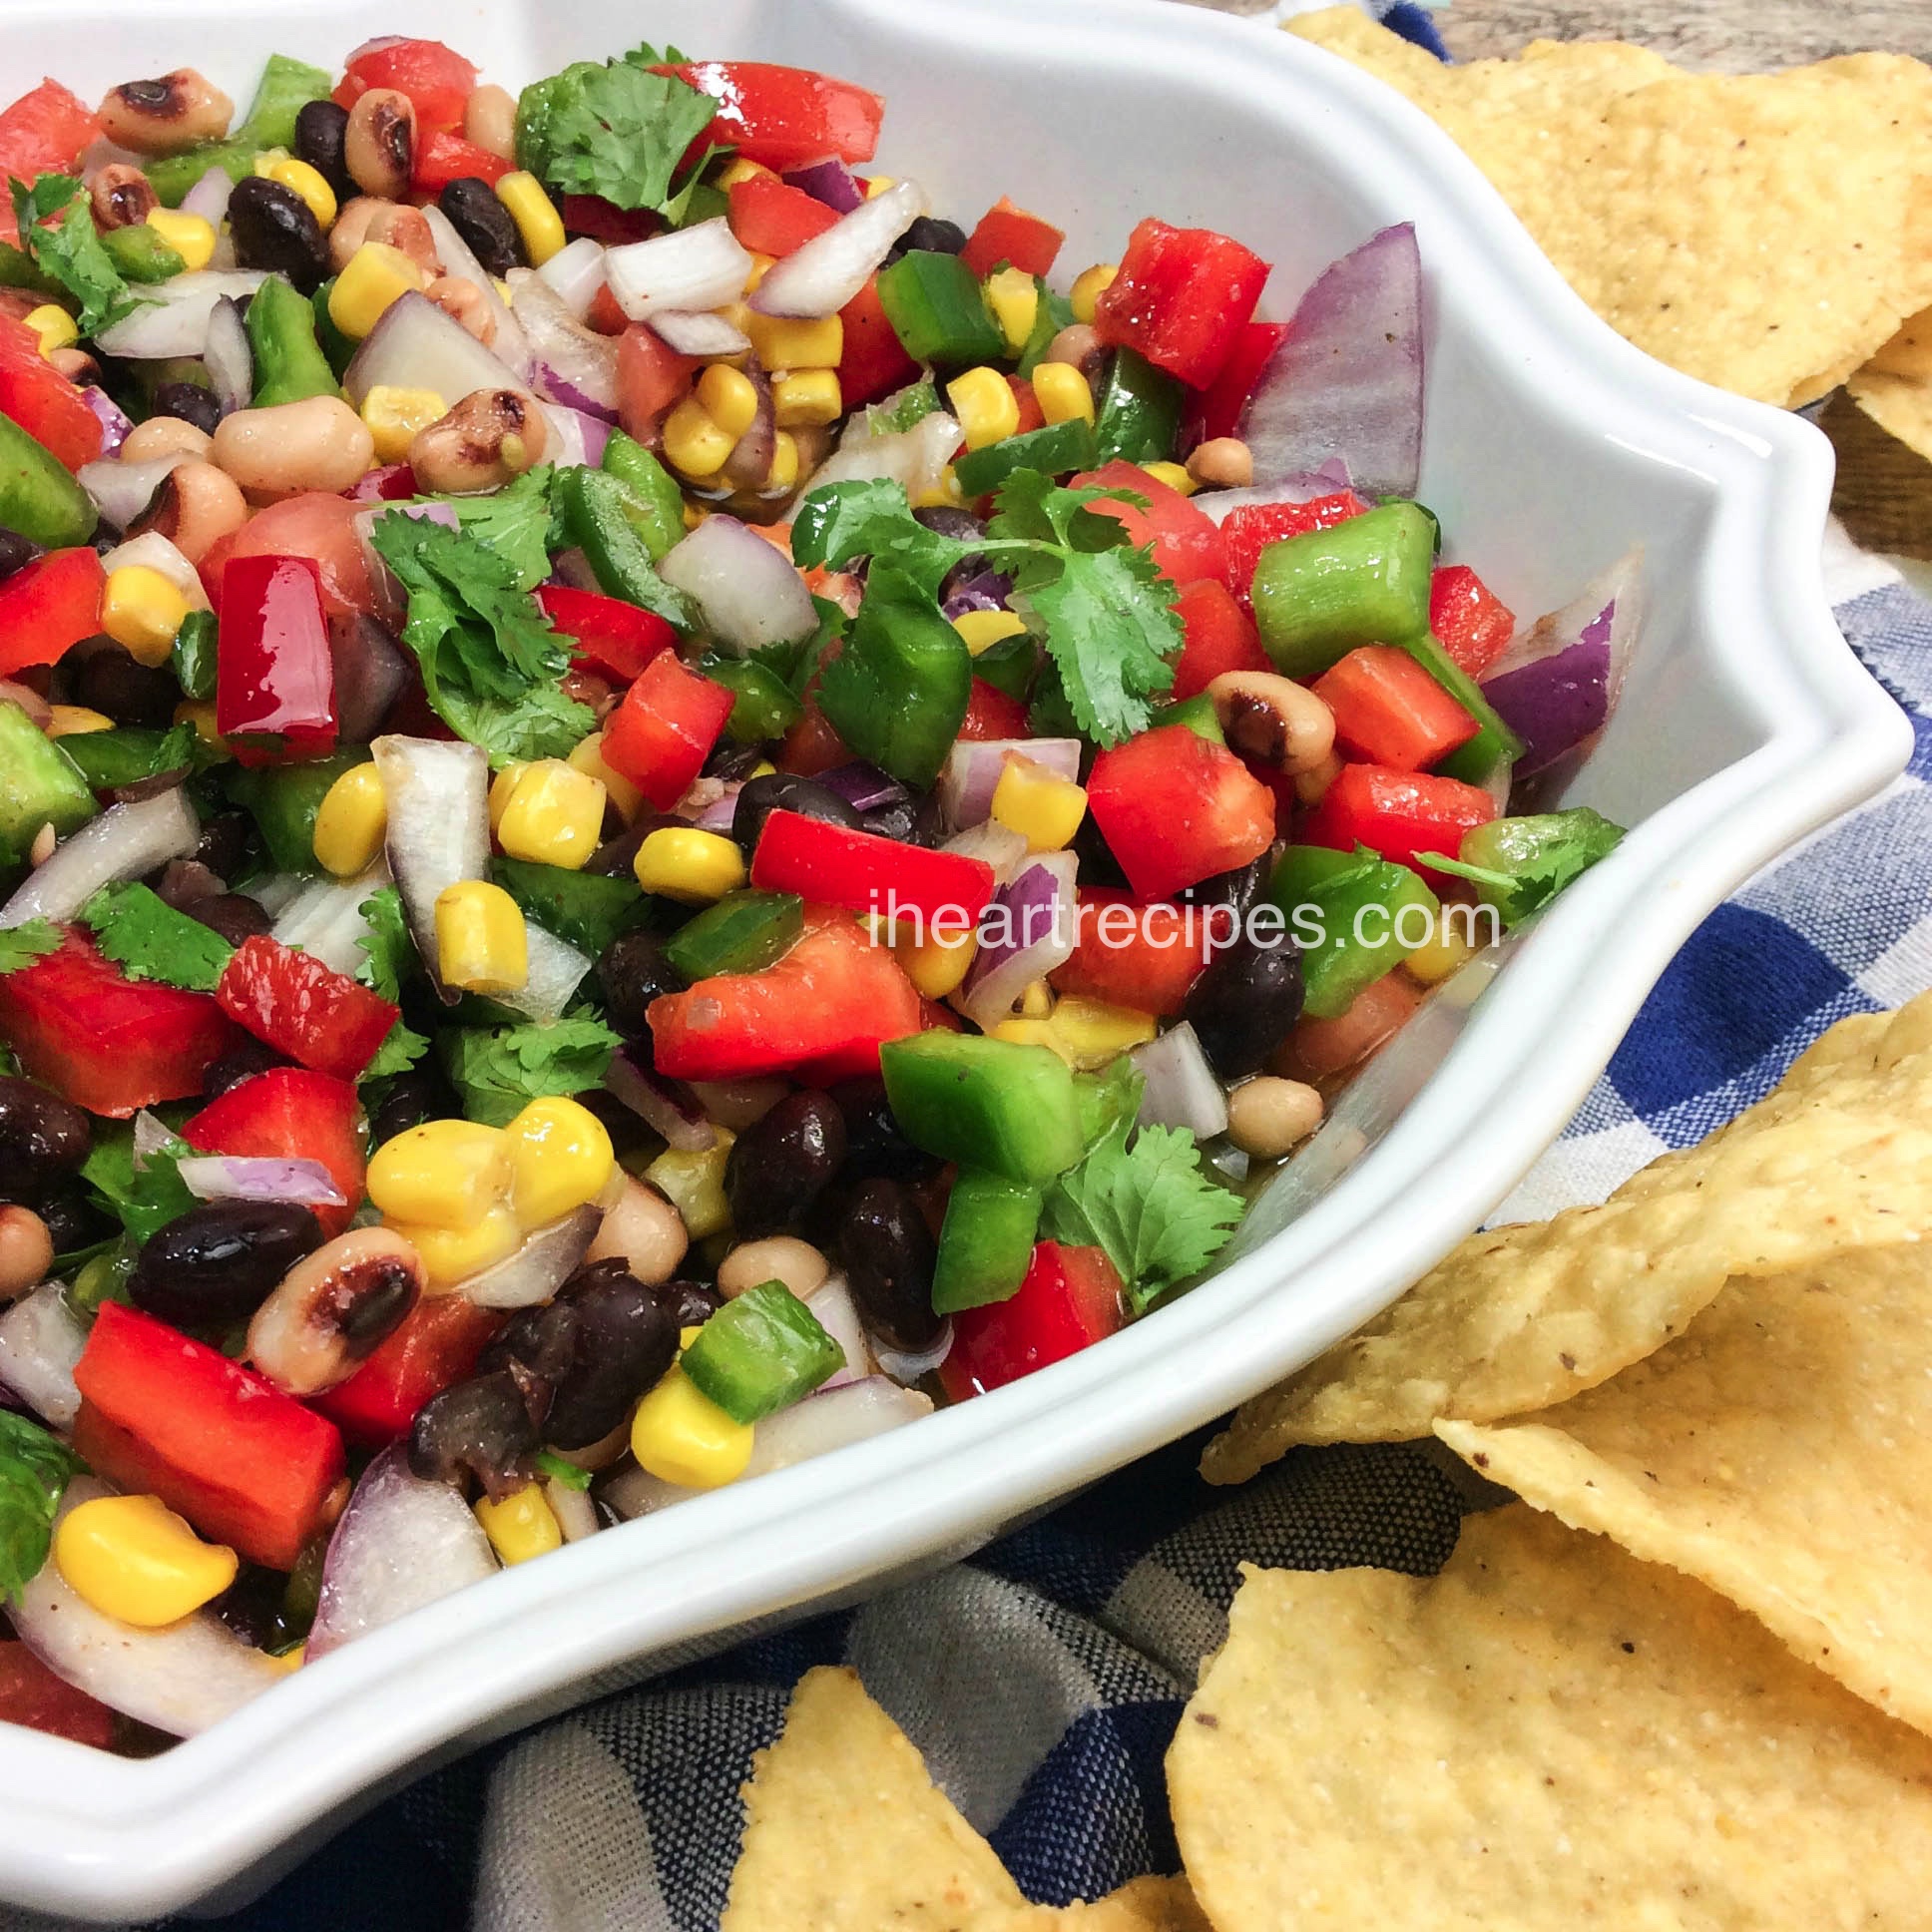 Crunchy tortilla chips compliment this bowl full of bright and tasty Texas Caviar. It's easy and delicious! 